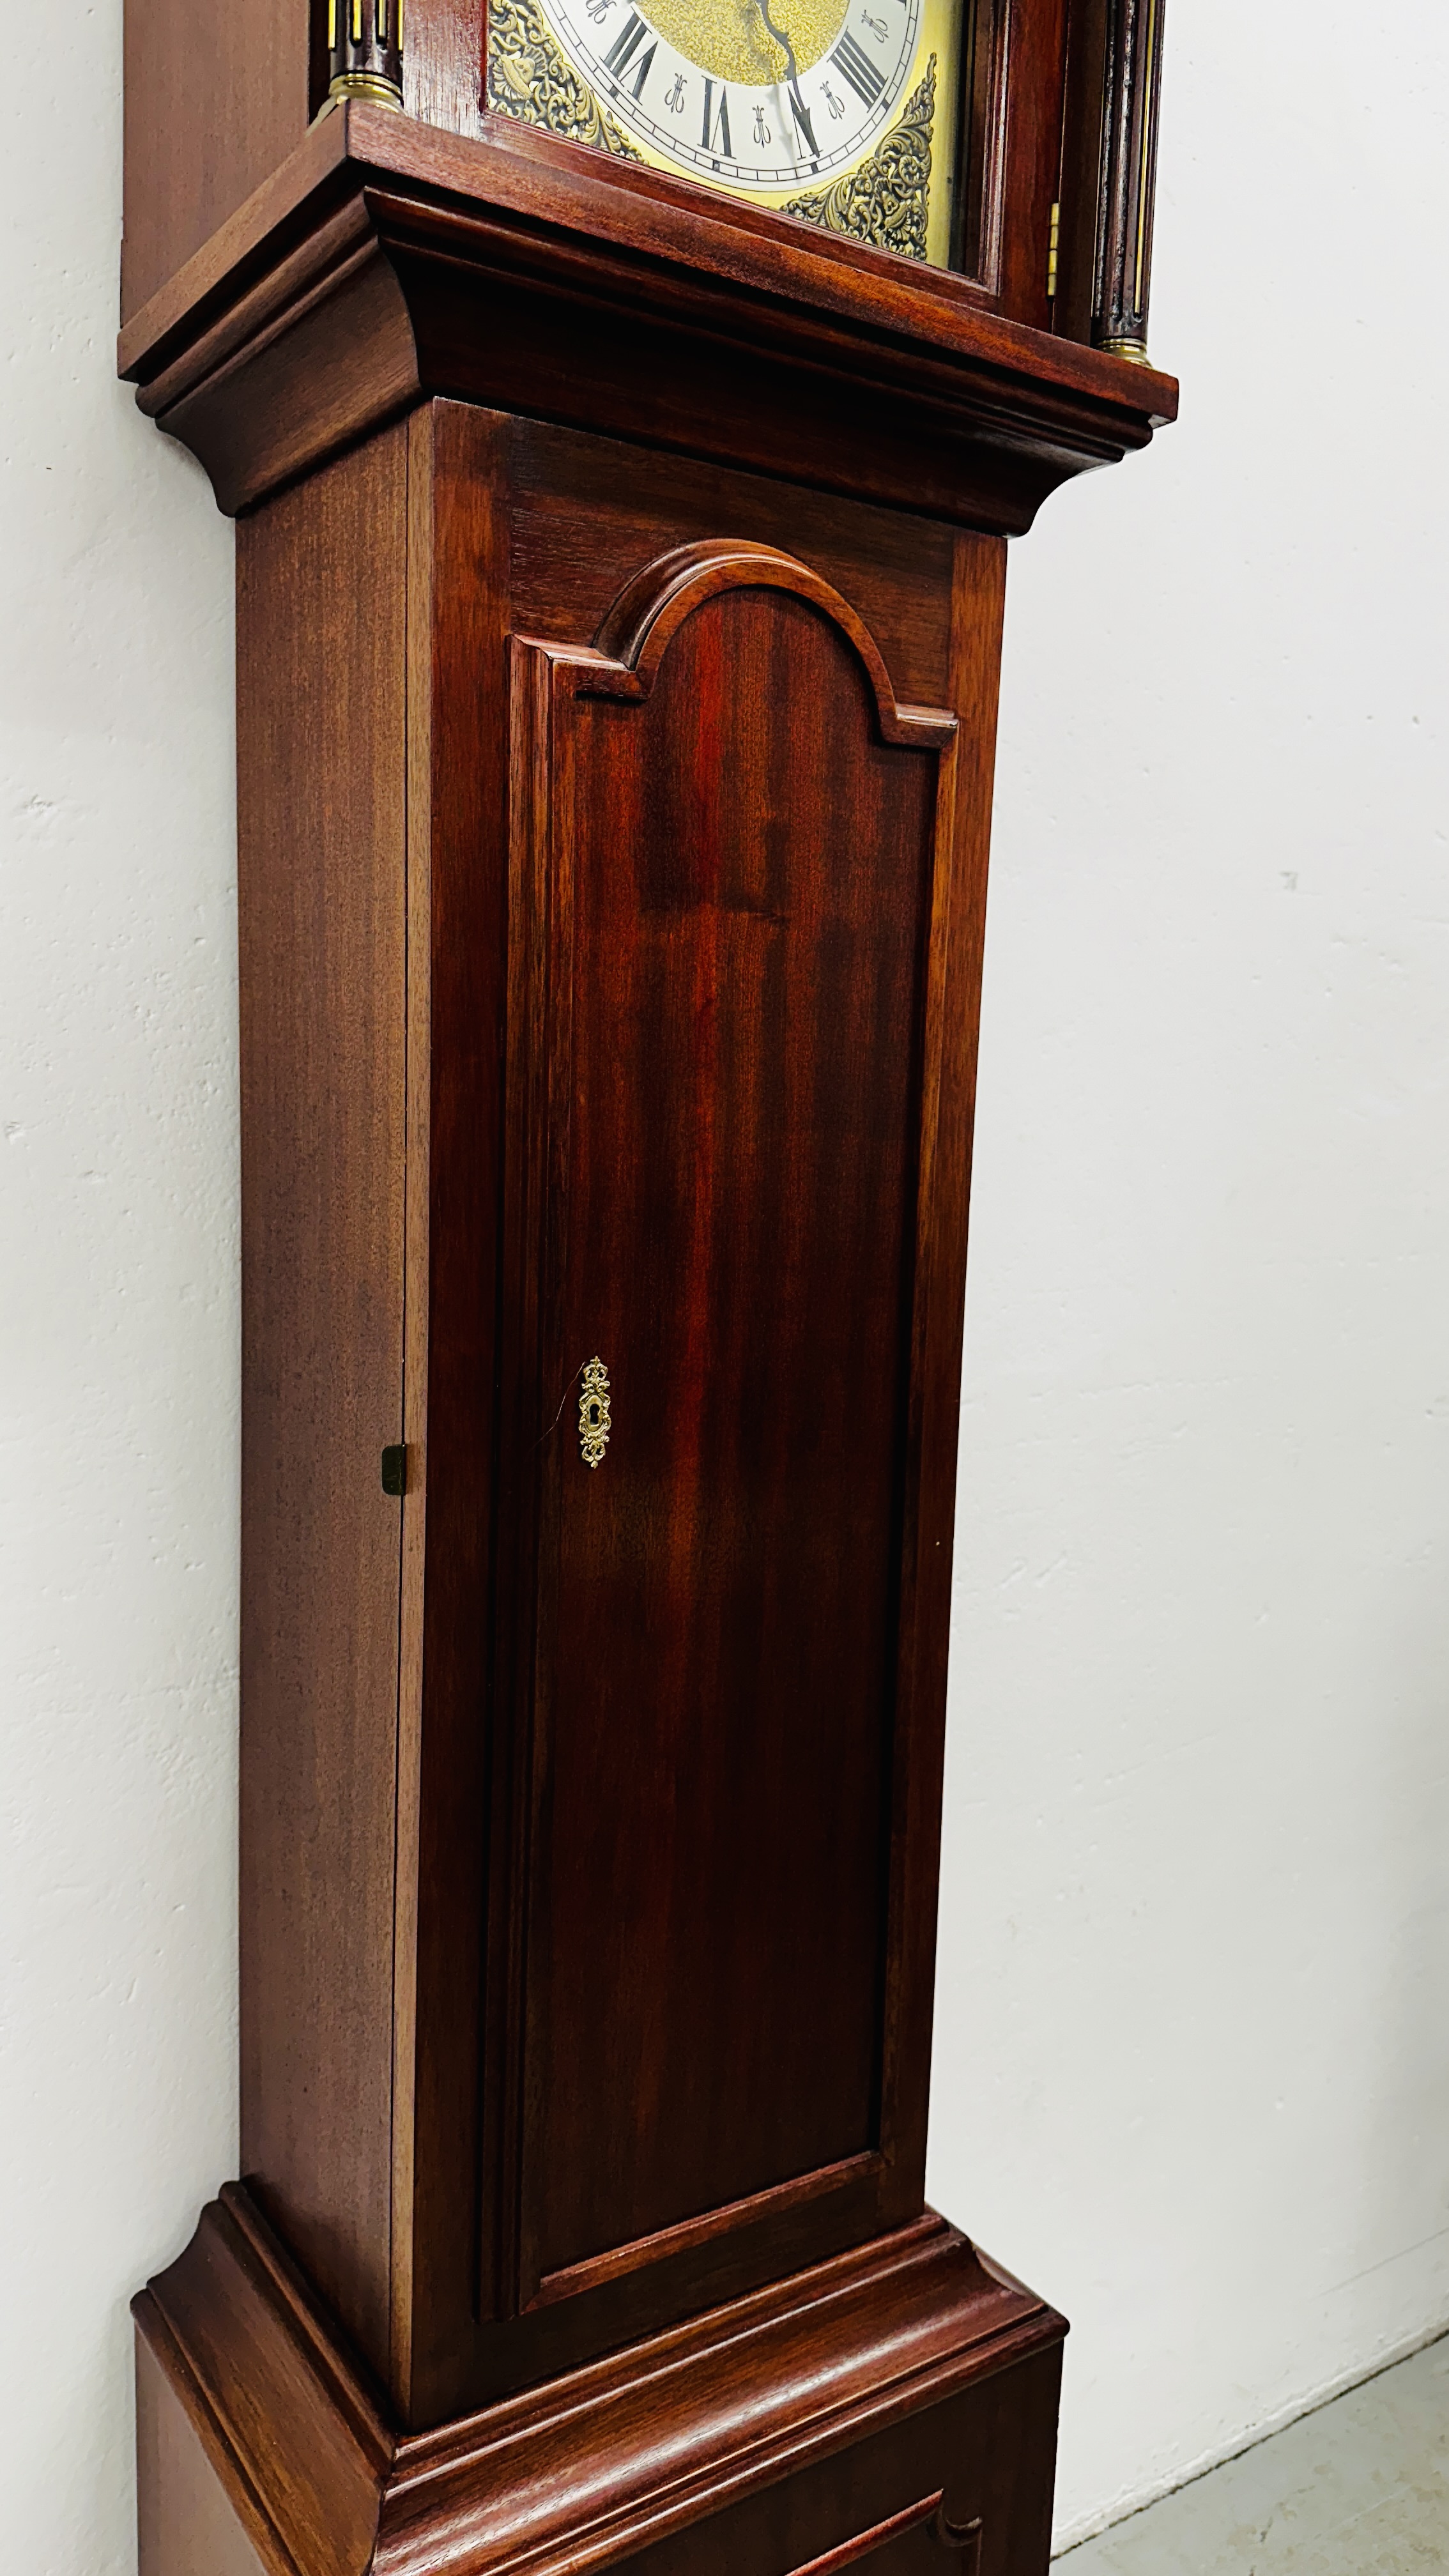 A MAHOGANY CASED REPRODUCTION GRANDFATHER CLOCK WITH MOON PHASE DIAL, - Image 4 of 9